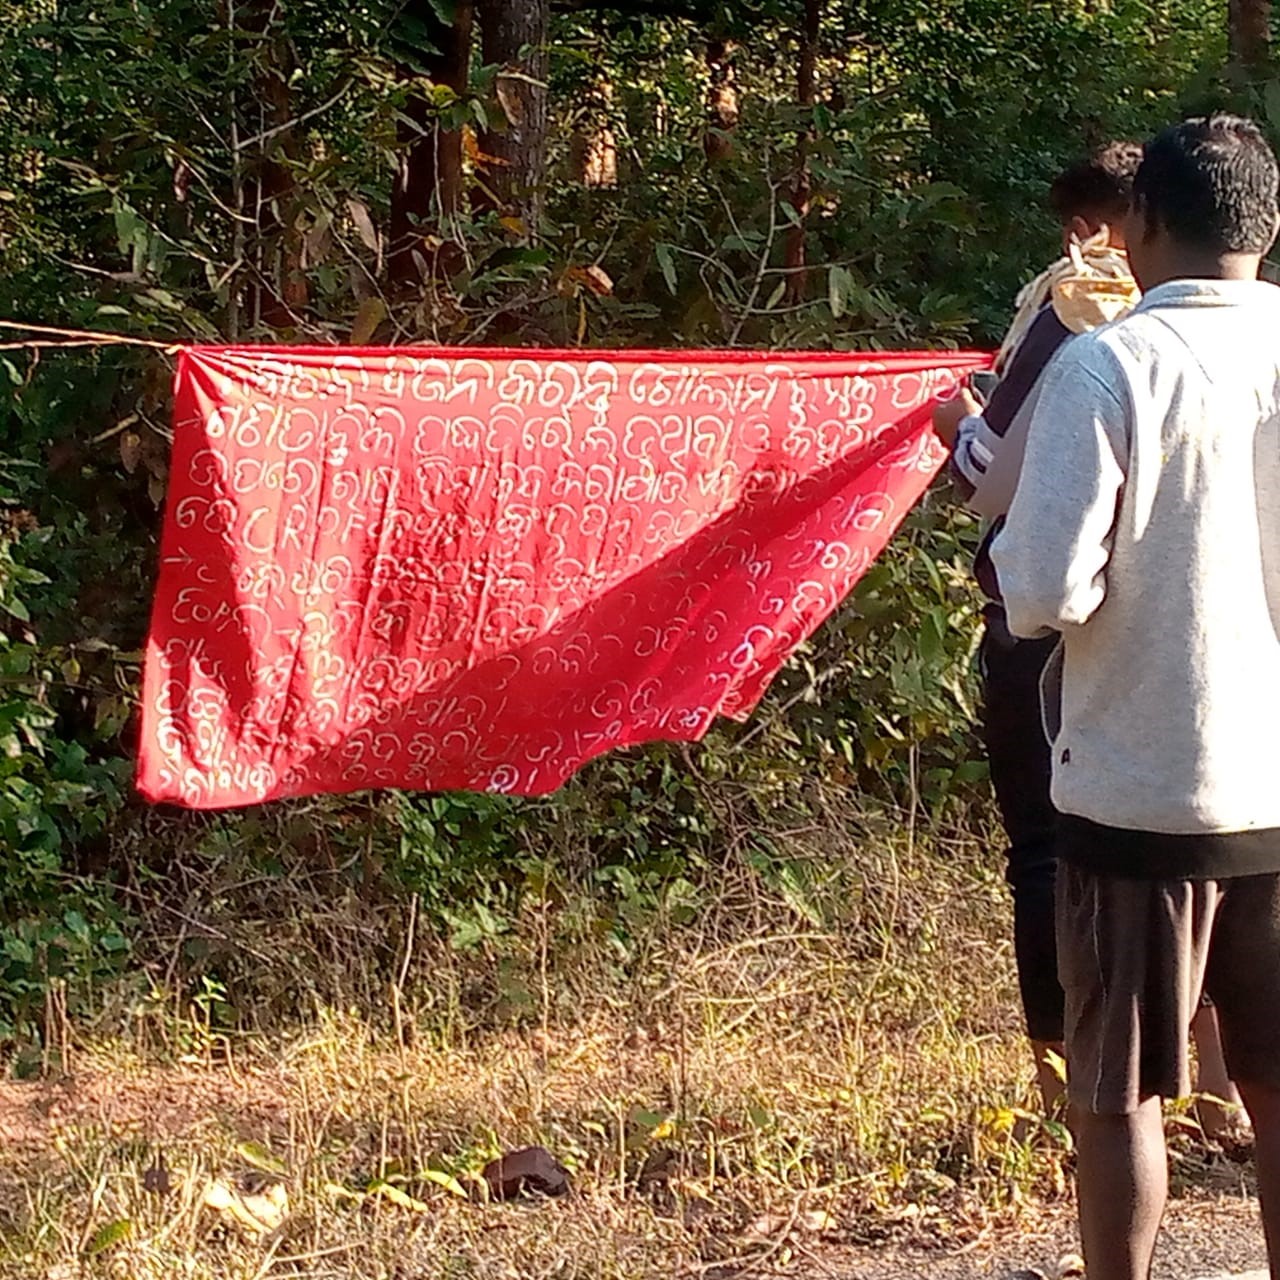 TGA0731 – Maoists Use Posters as Bait to Lure Security Forces to an IED Scene